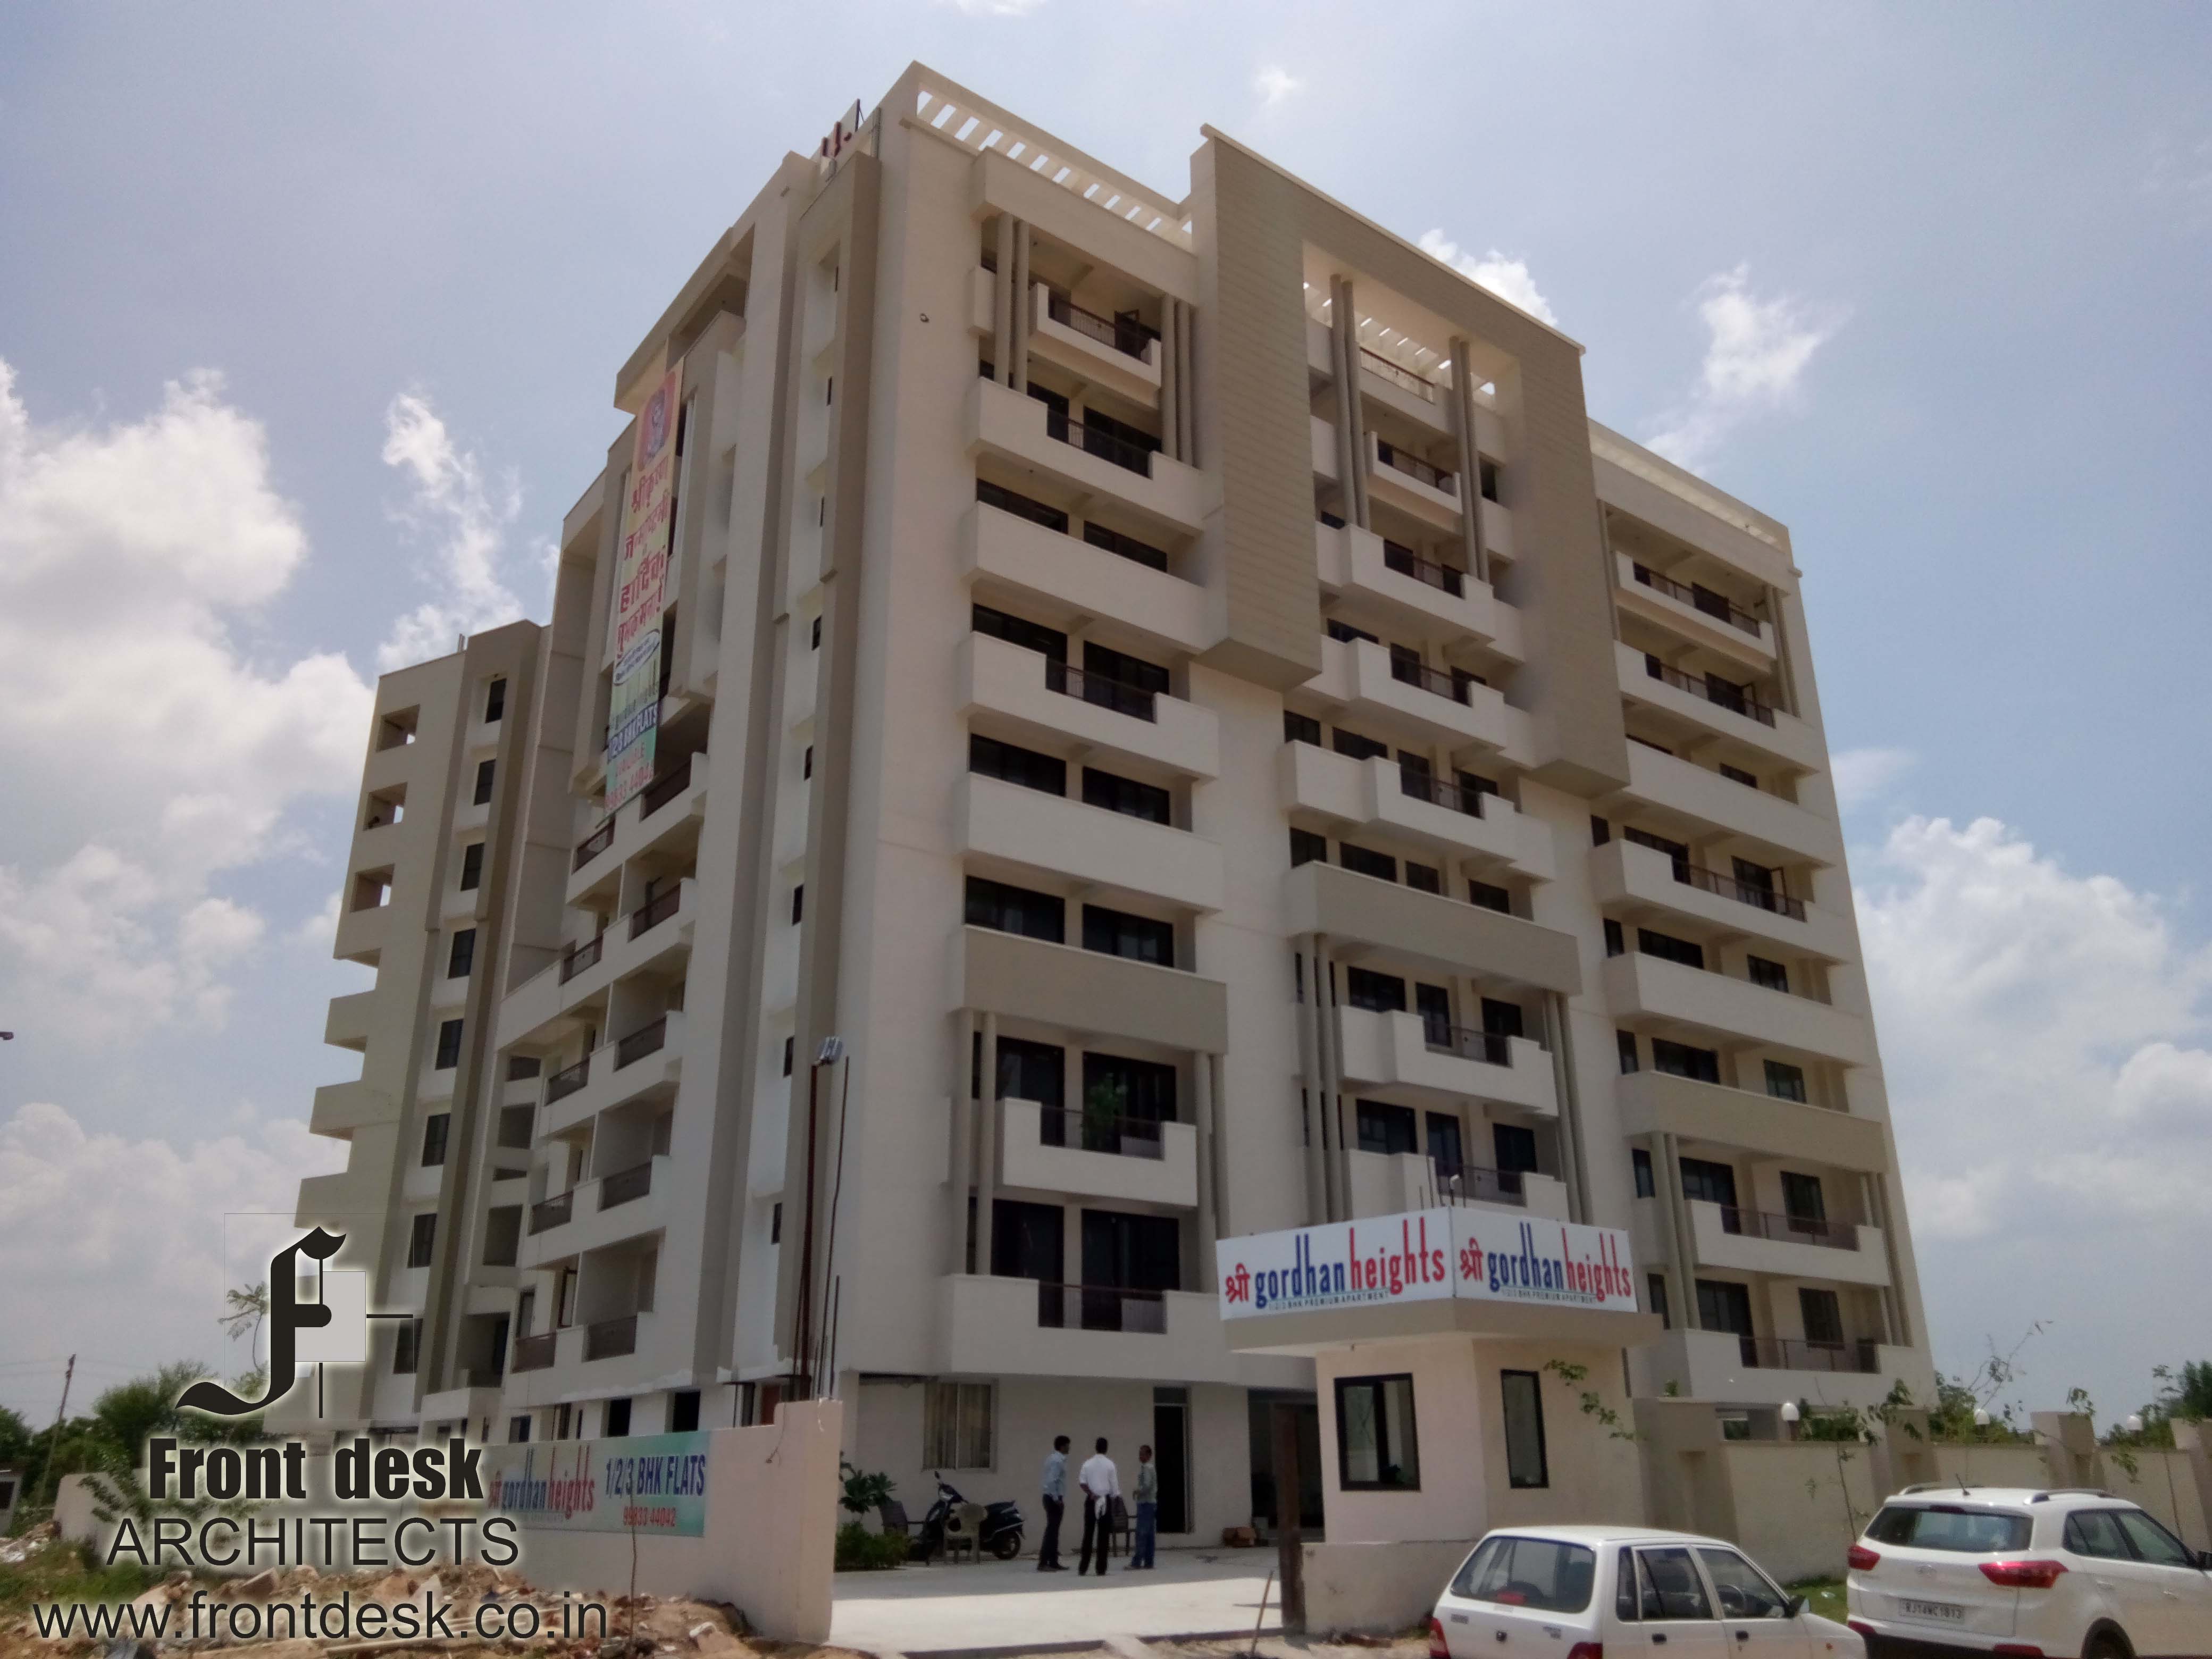 Shri gordhan heights a Housing project by front desk architects